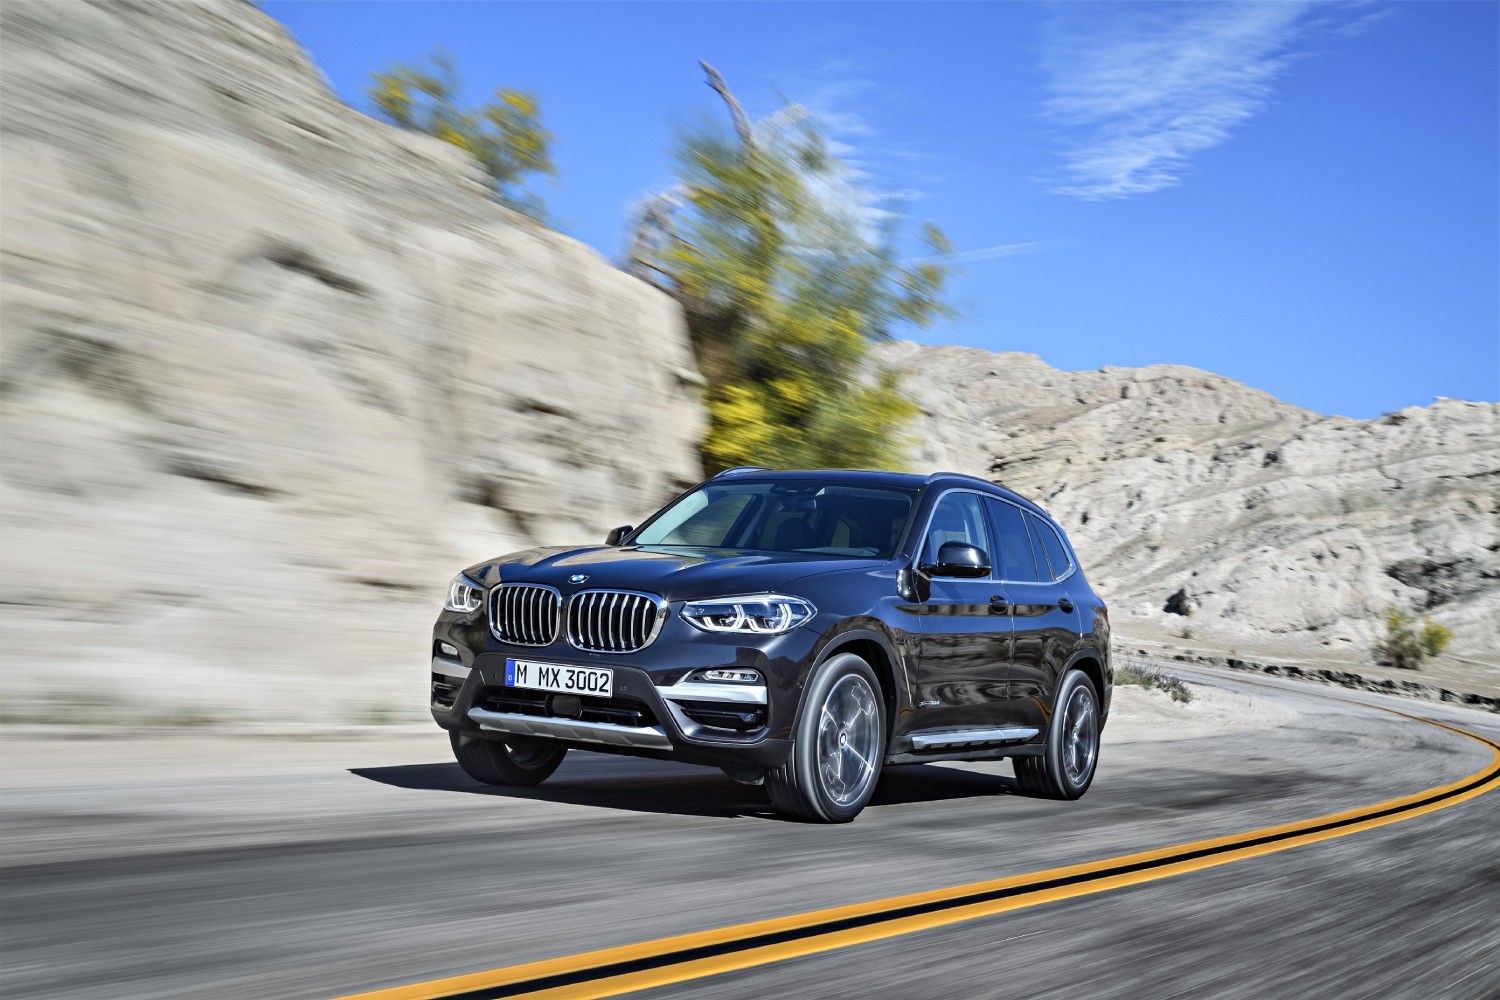 Reliable and popular small luxury SUVs like the BMW X3